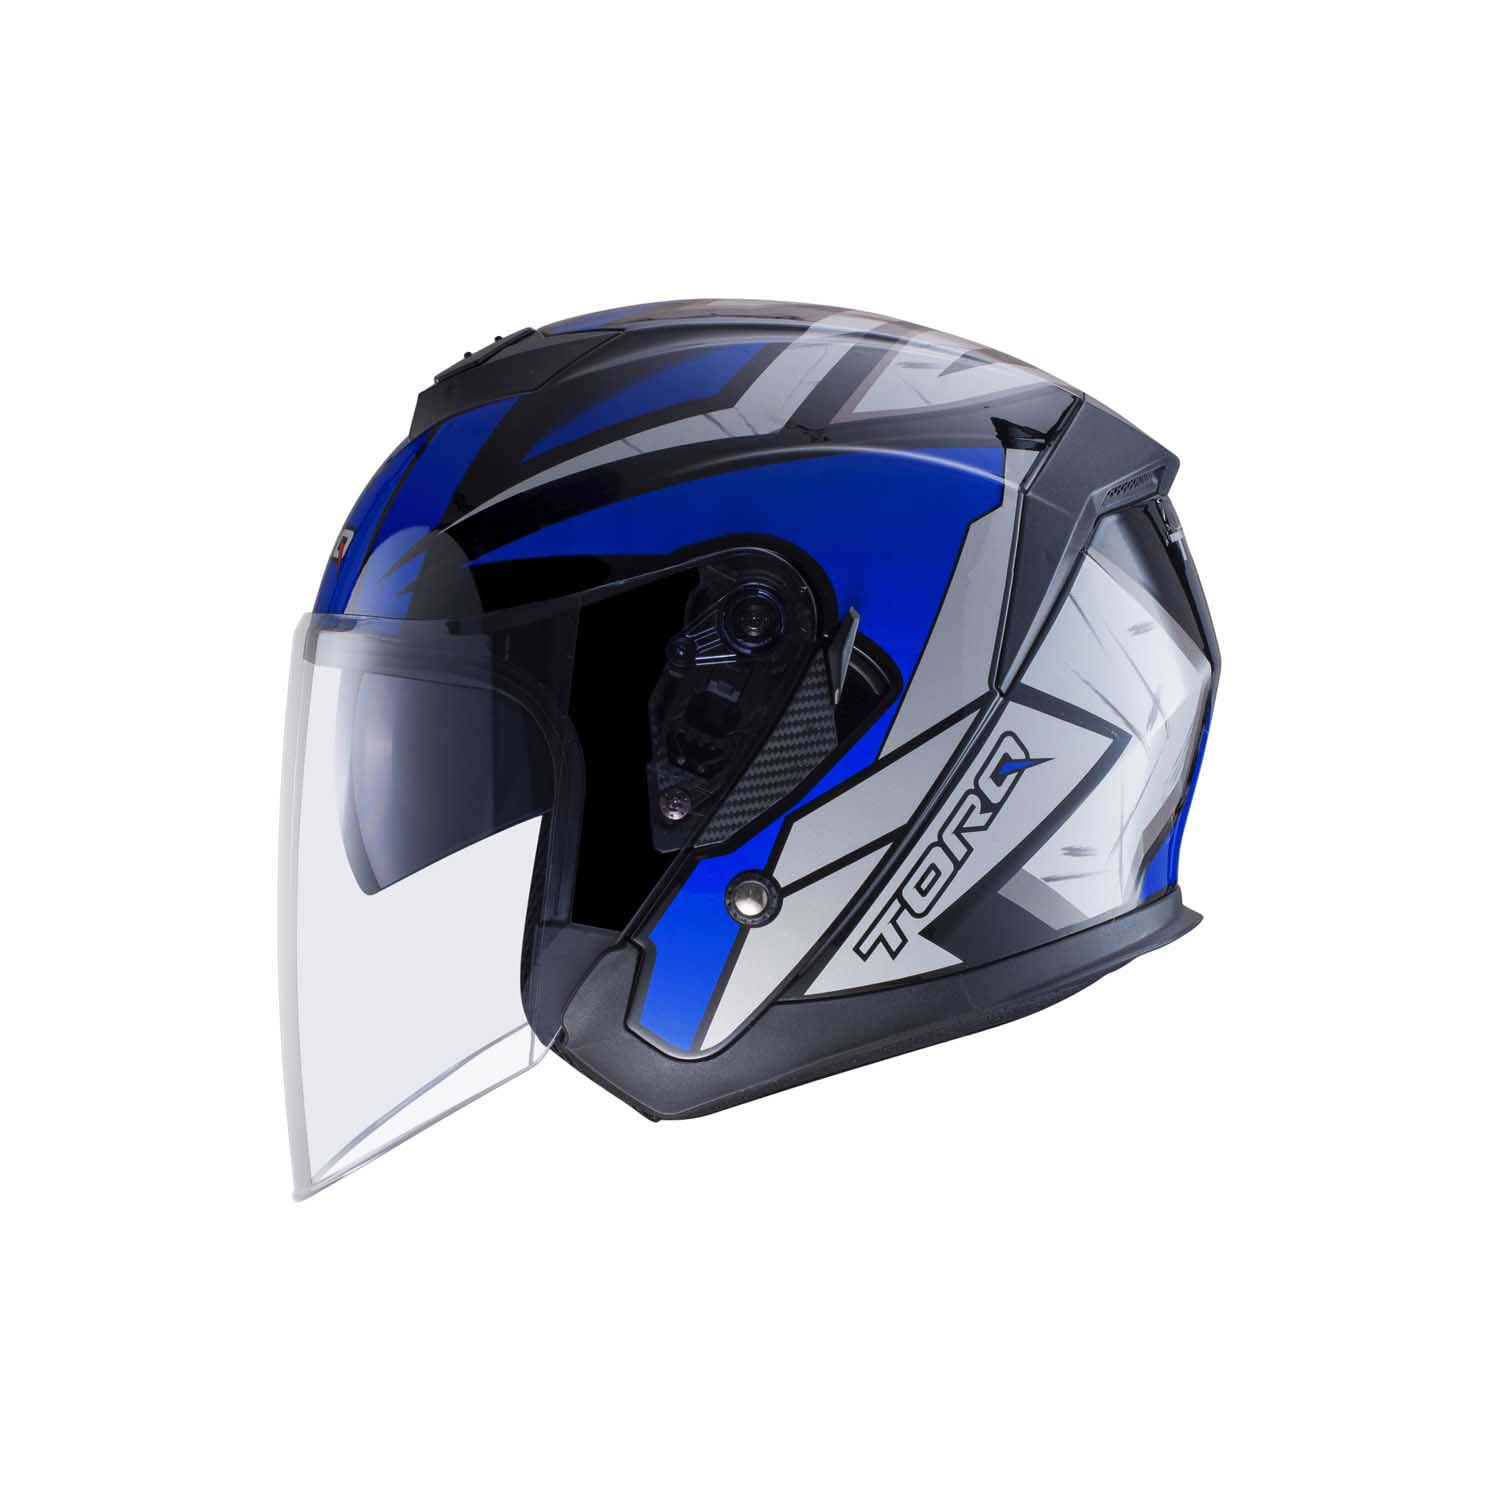 Clean and crisp high quality helmet product photography for e-commerce to easily attract the audience.